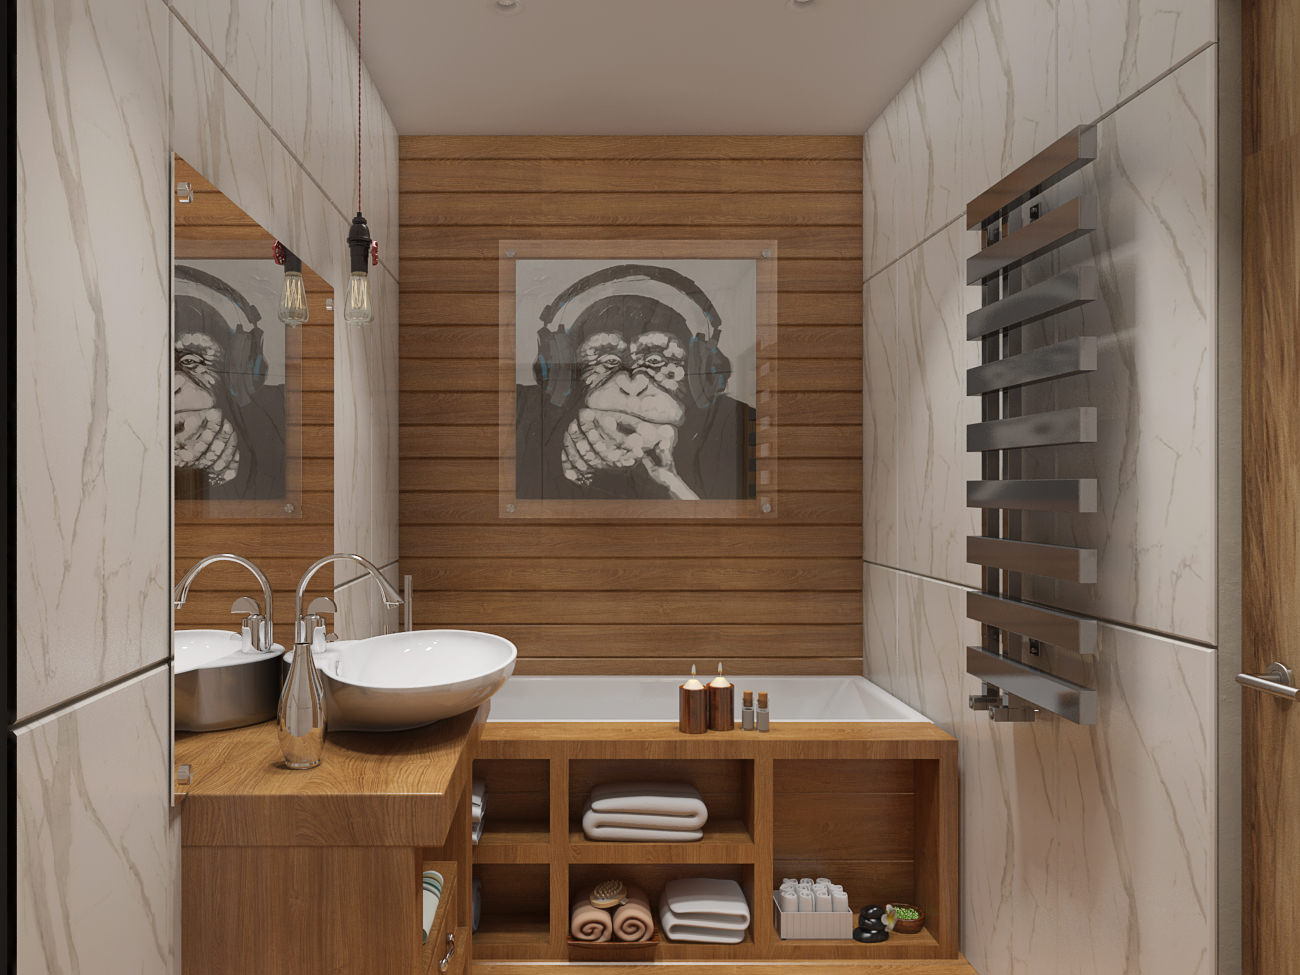 Bathroom design 6 sq m practicality and beauty